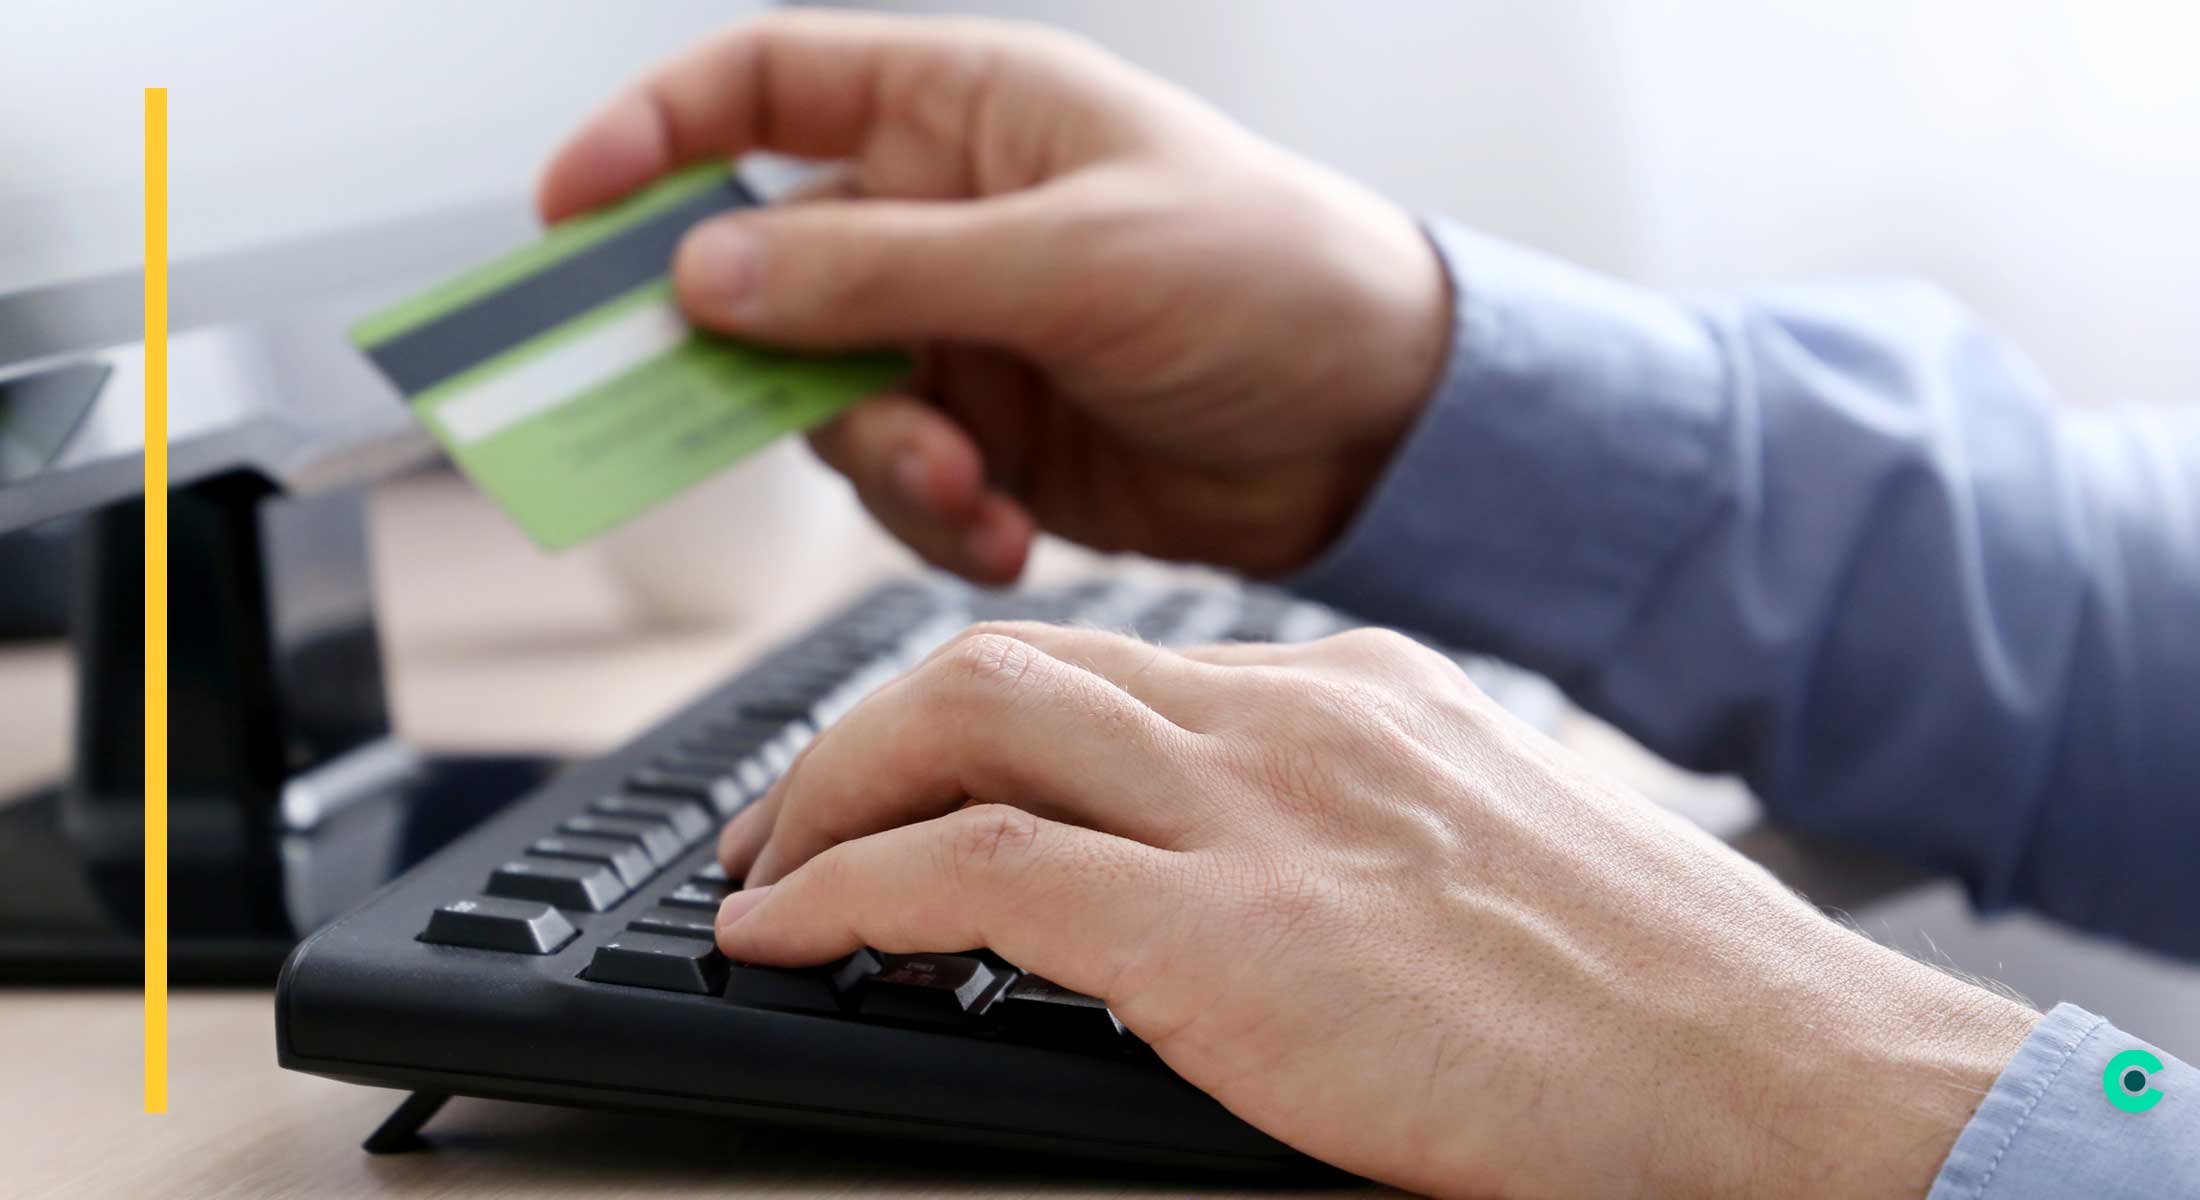 A man holds a credit card above a keyboard